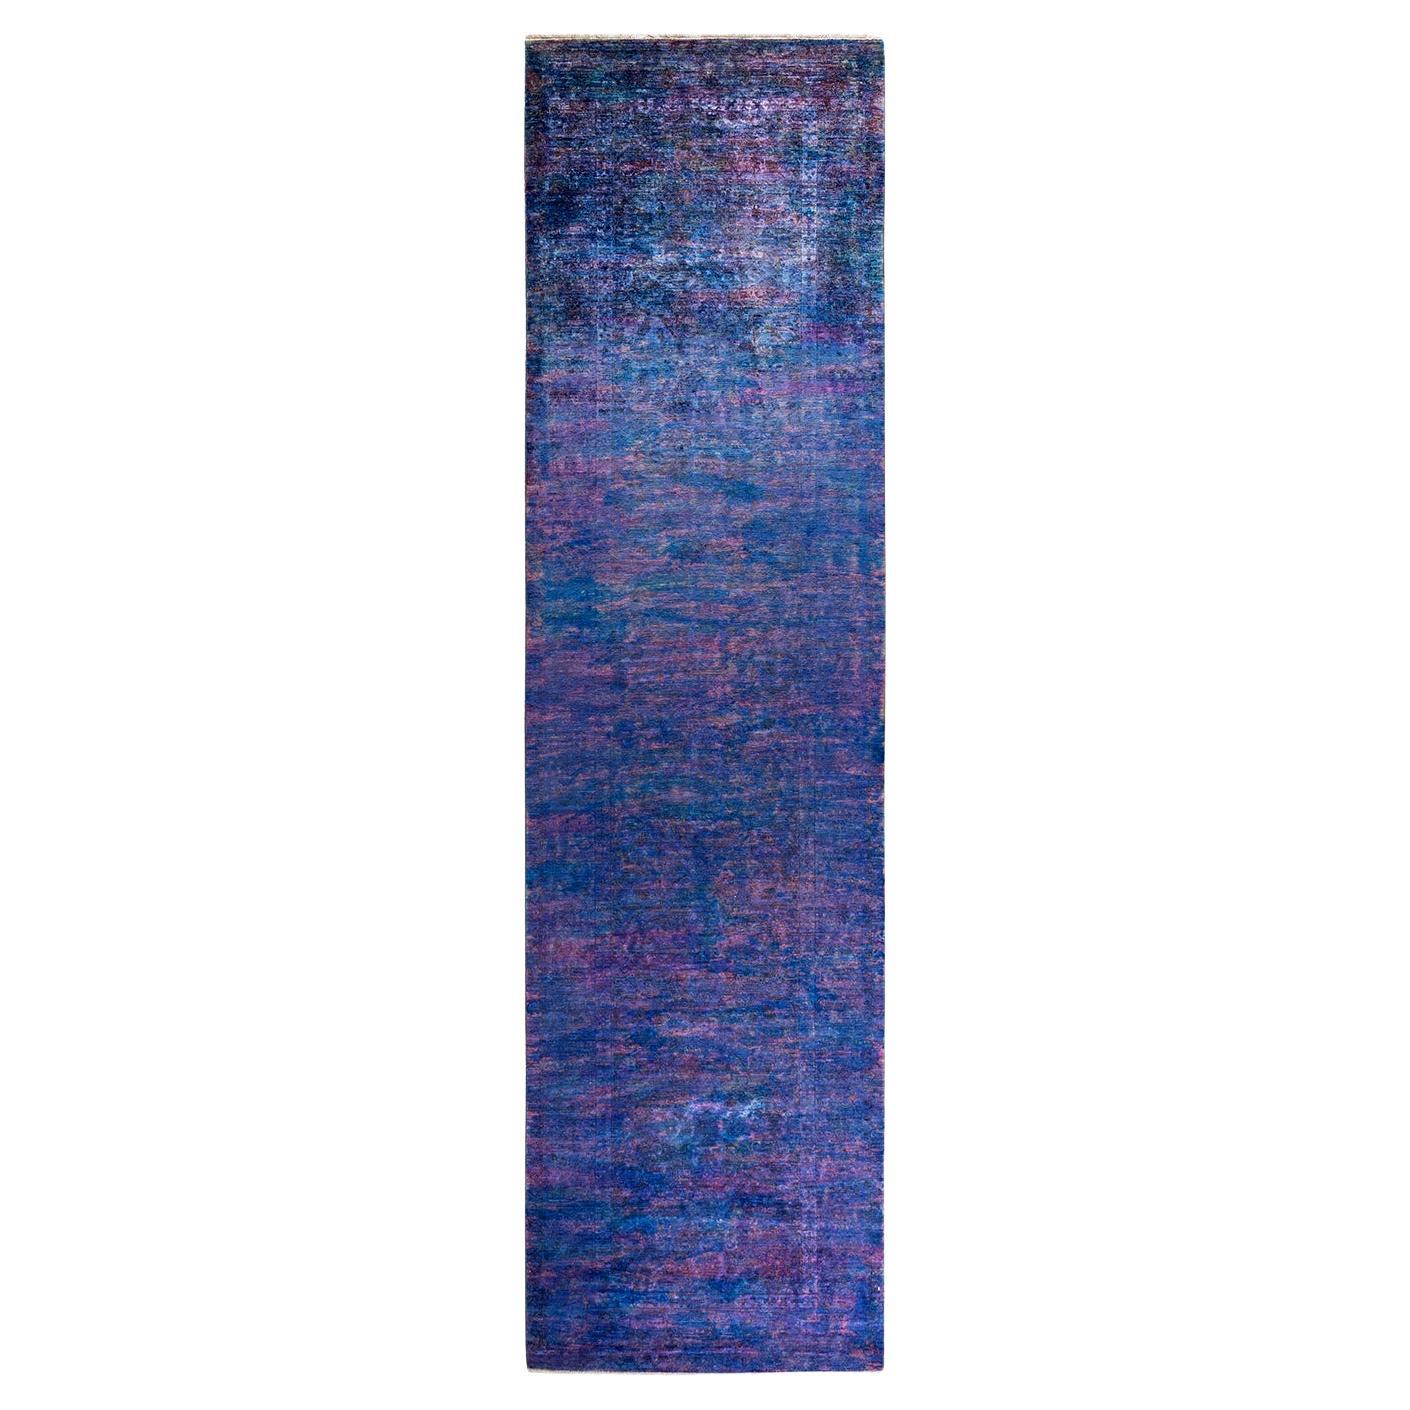 Contemporary Overdyed Hand Knotted Wool Multi Runner